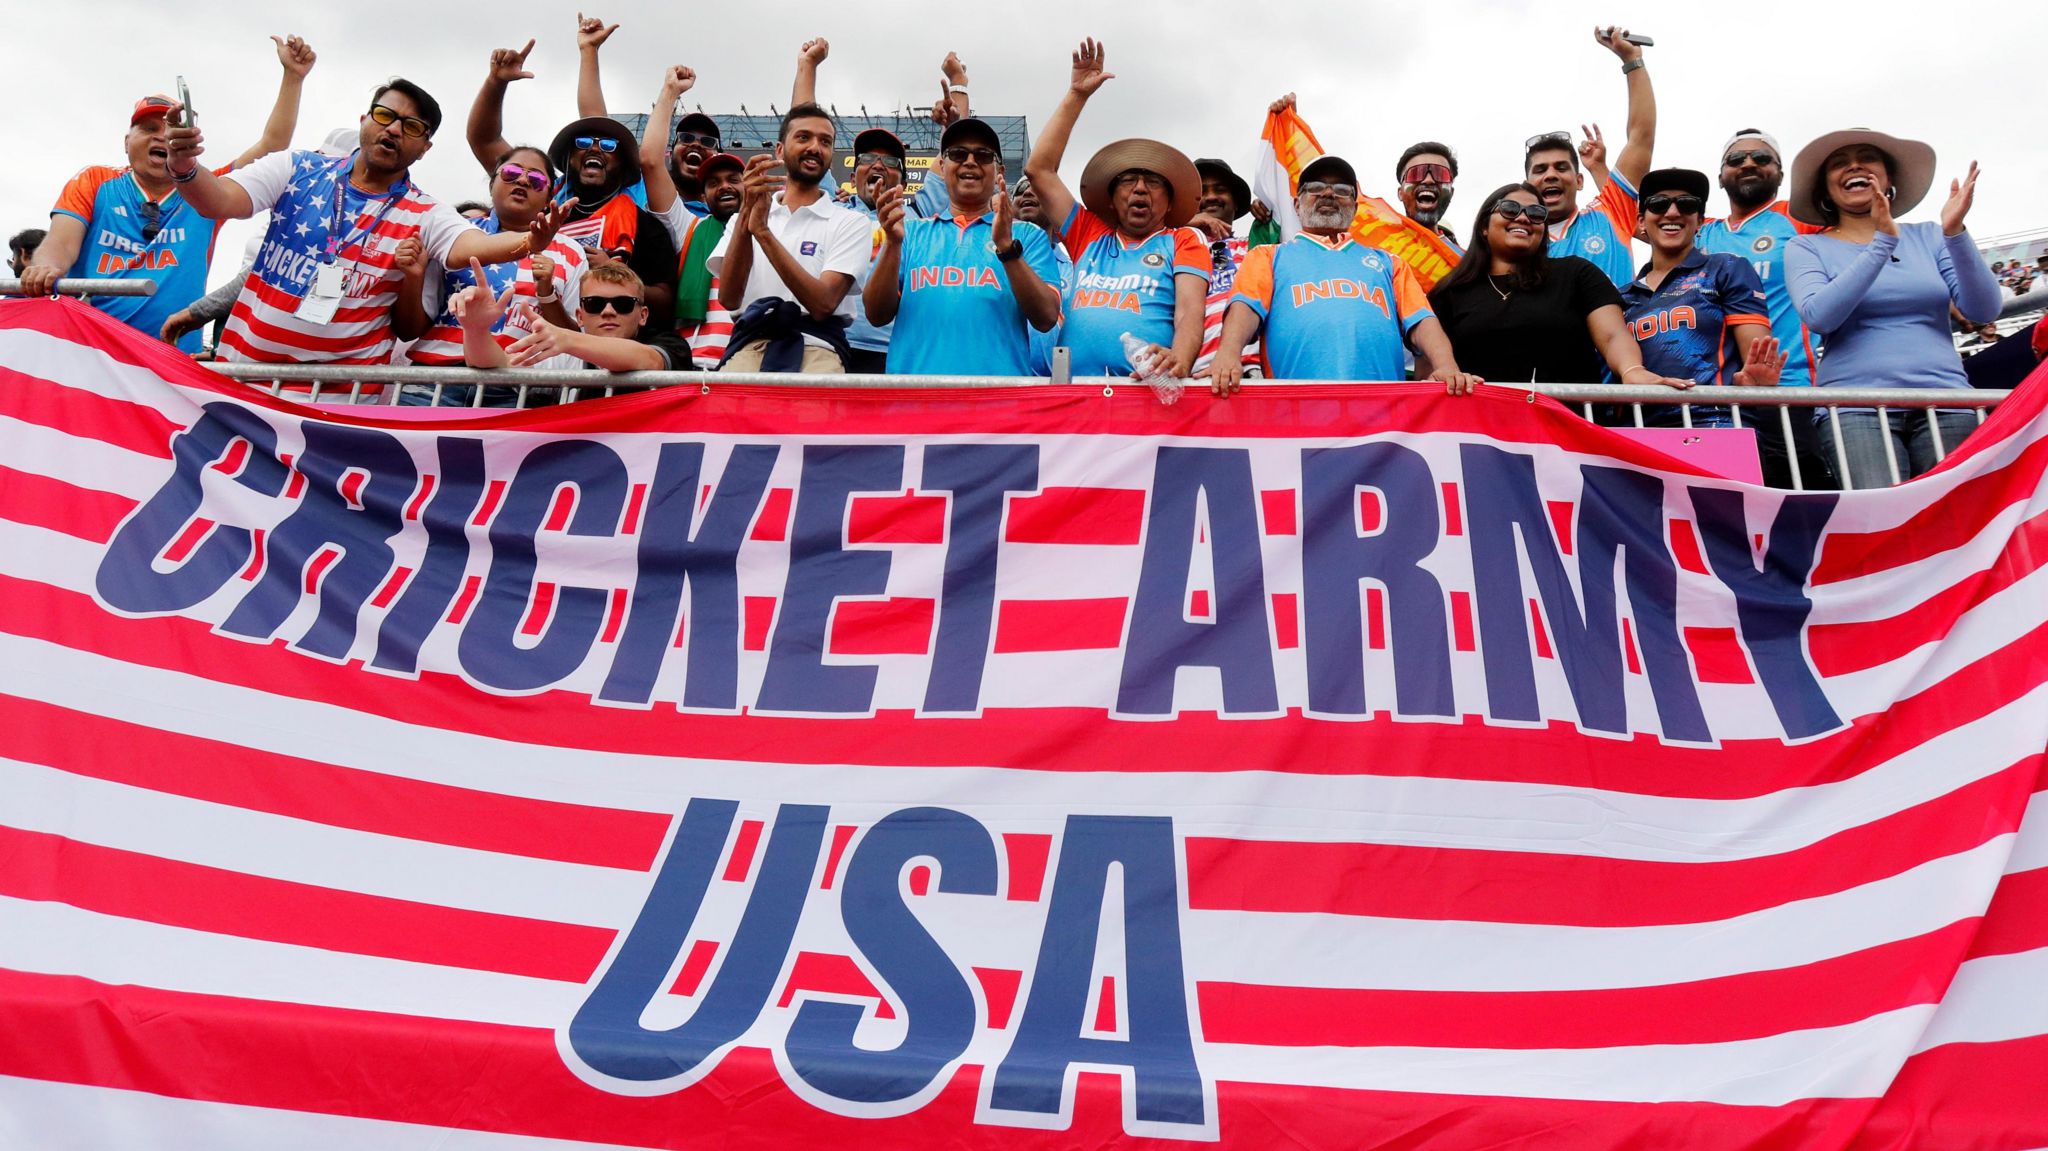 Fans, some wearing India shirts, stand and cheer above an enormous Stars and Stripes flag that has the phrase "Cricket Army USA" written on it